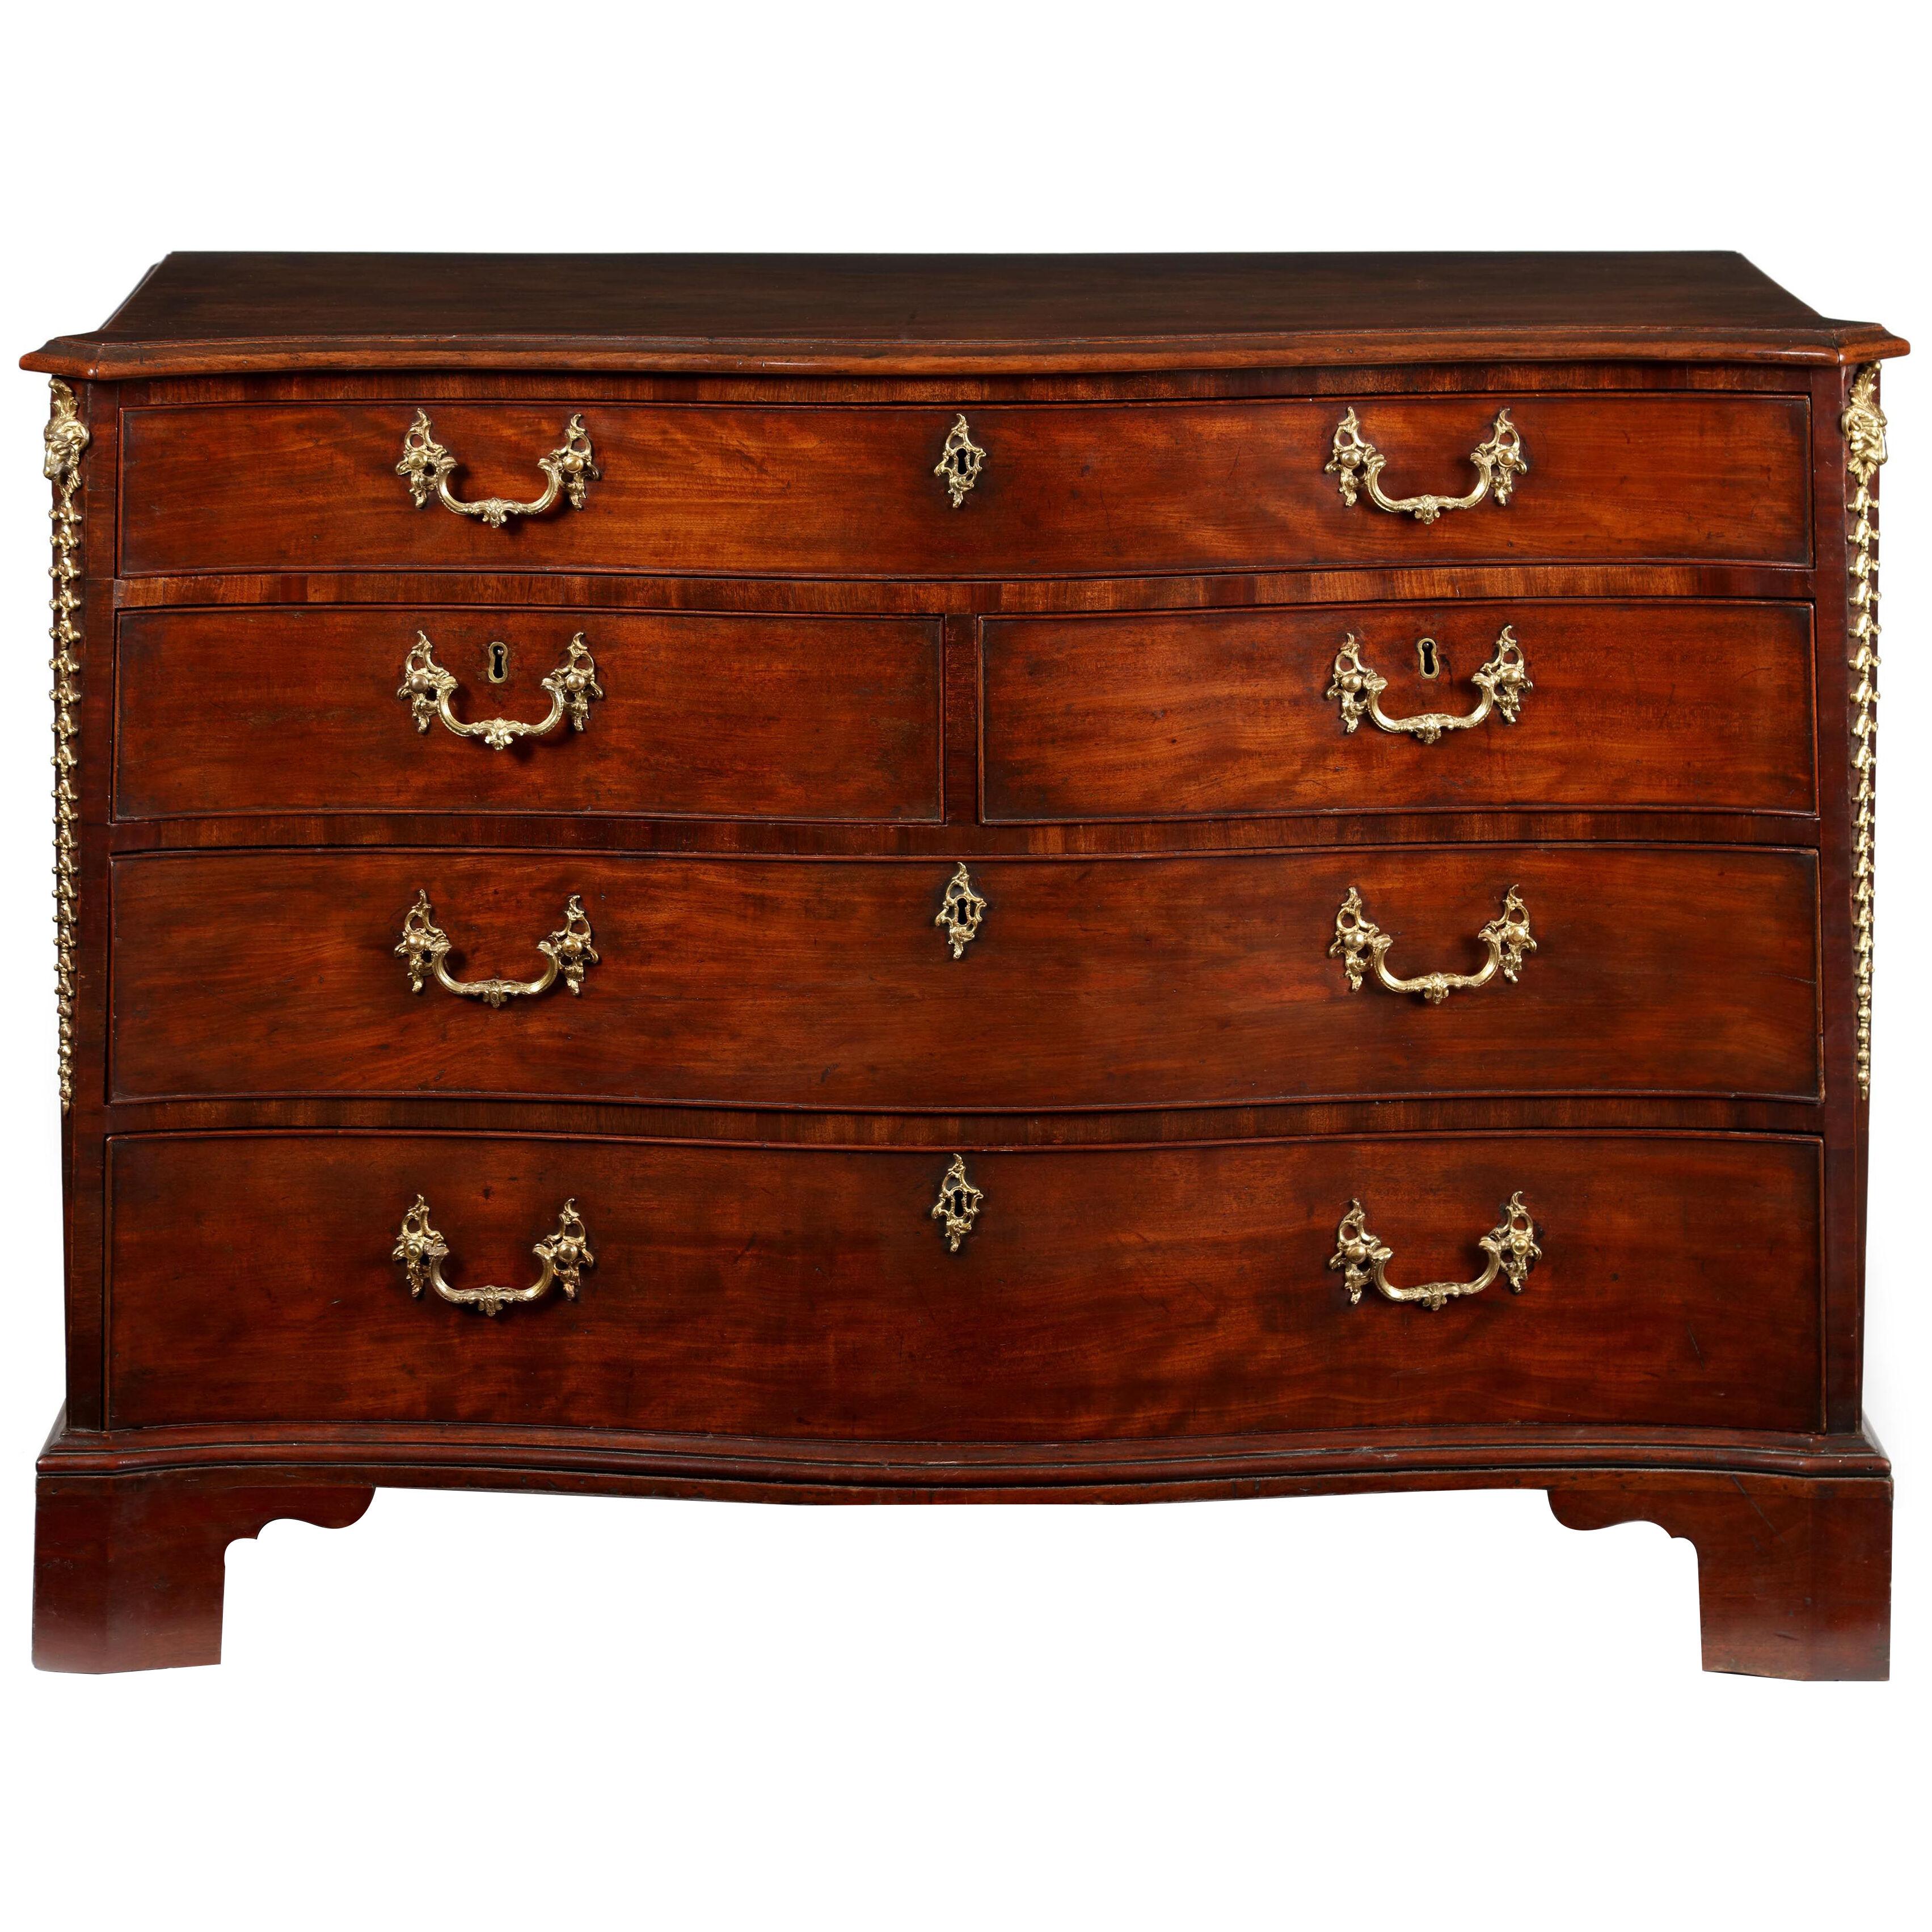 George III mahogany & brass mounted serpentine commode, manner of Ince & Mayhew